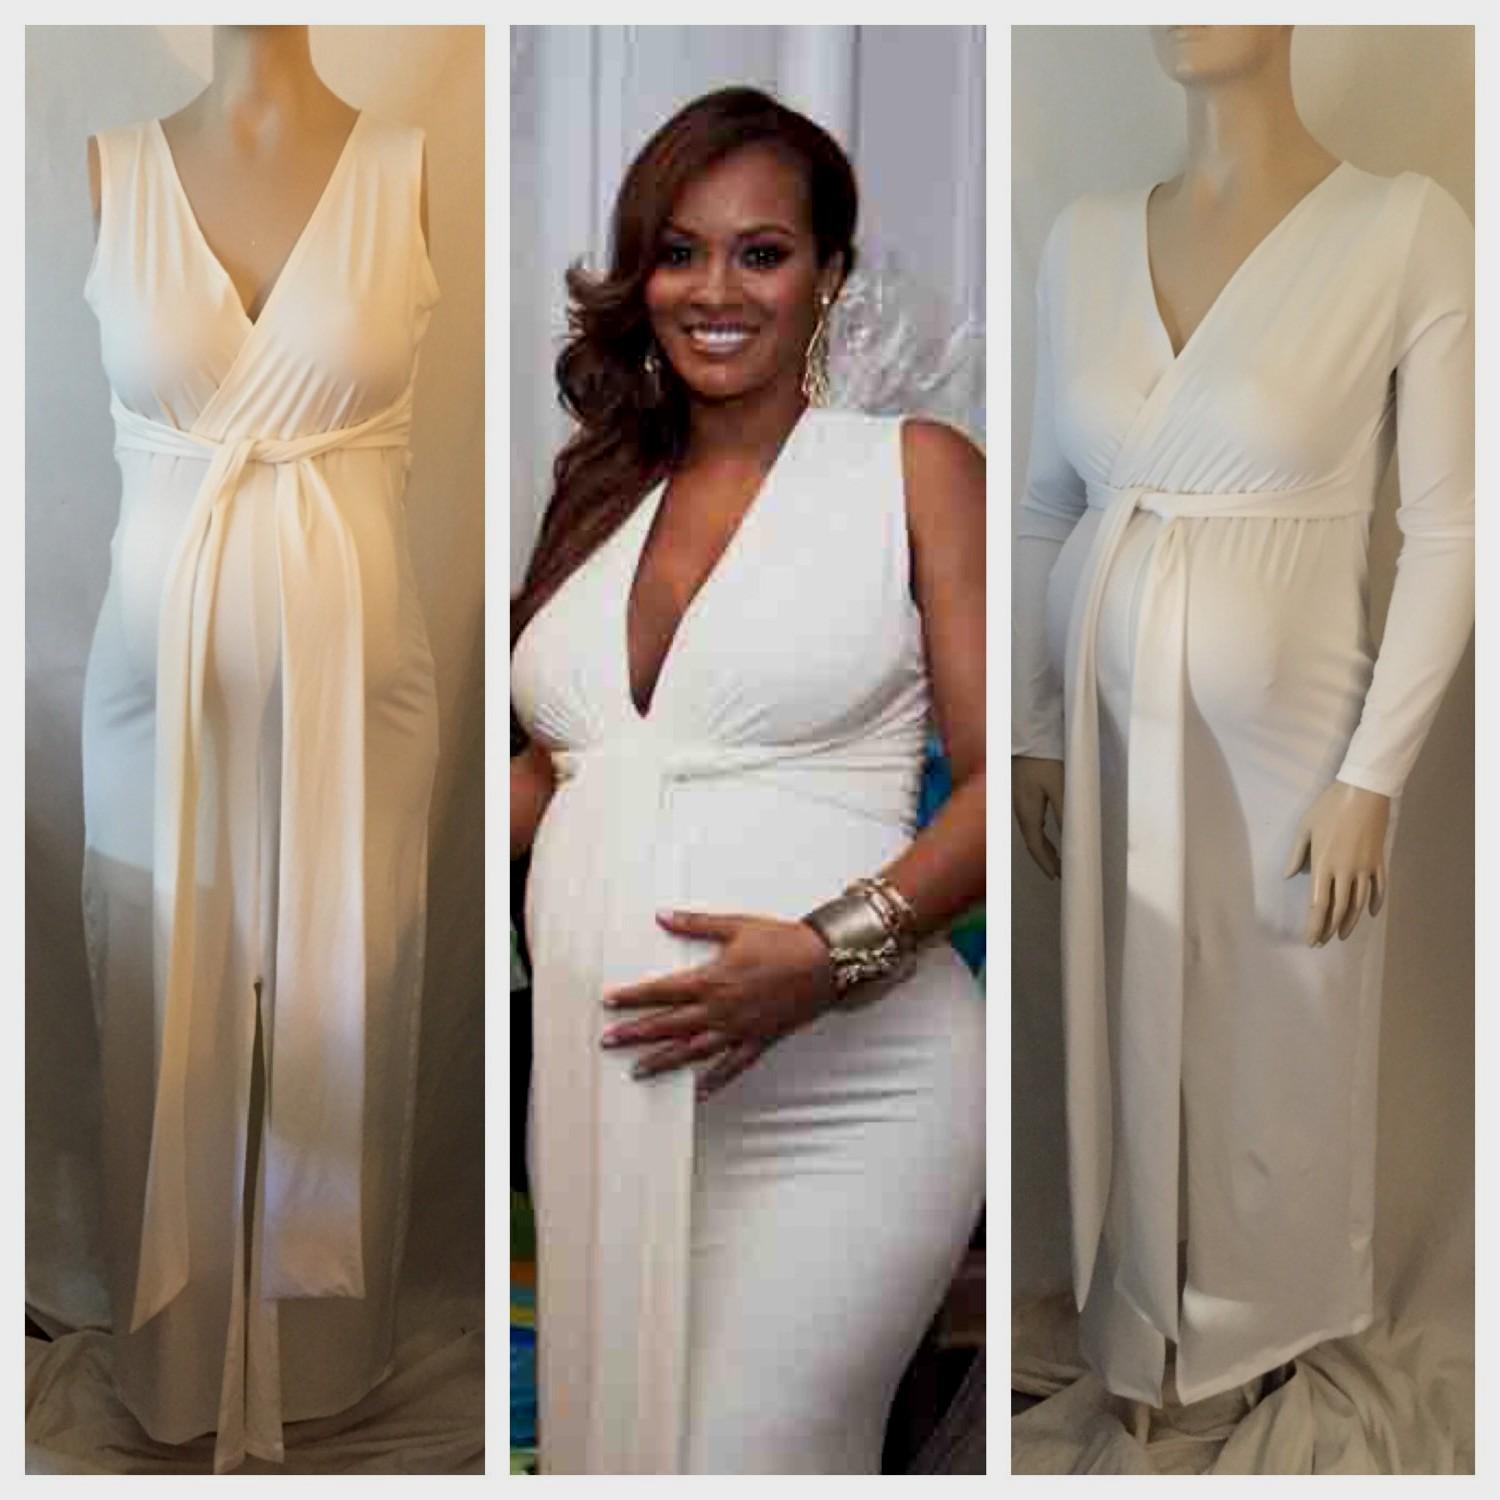 Full Size of Baby Shower:maternity Clothes H&m Showing Lsi Keywords For Baby Shower Dresses Maternity Evening Gowns Non Maternity Dresses For Baby Shower Affordable Maternity Dresses For Baby Shower Long Maternity Dresses For Baby Shower Cheap Plus Size Maternity Clothes Baby Shower Dresses For Fall